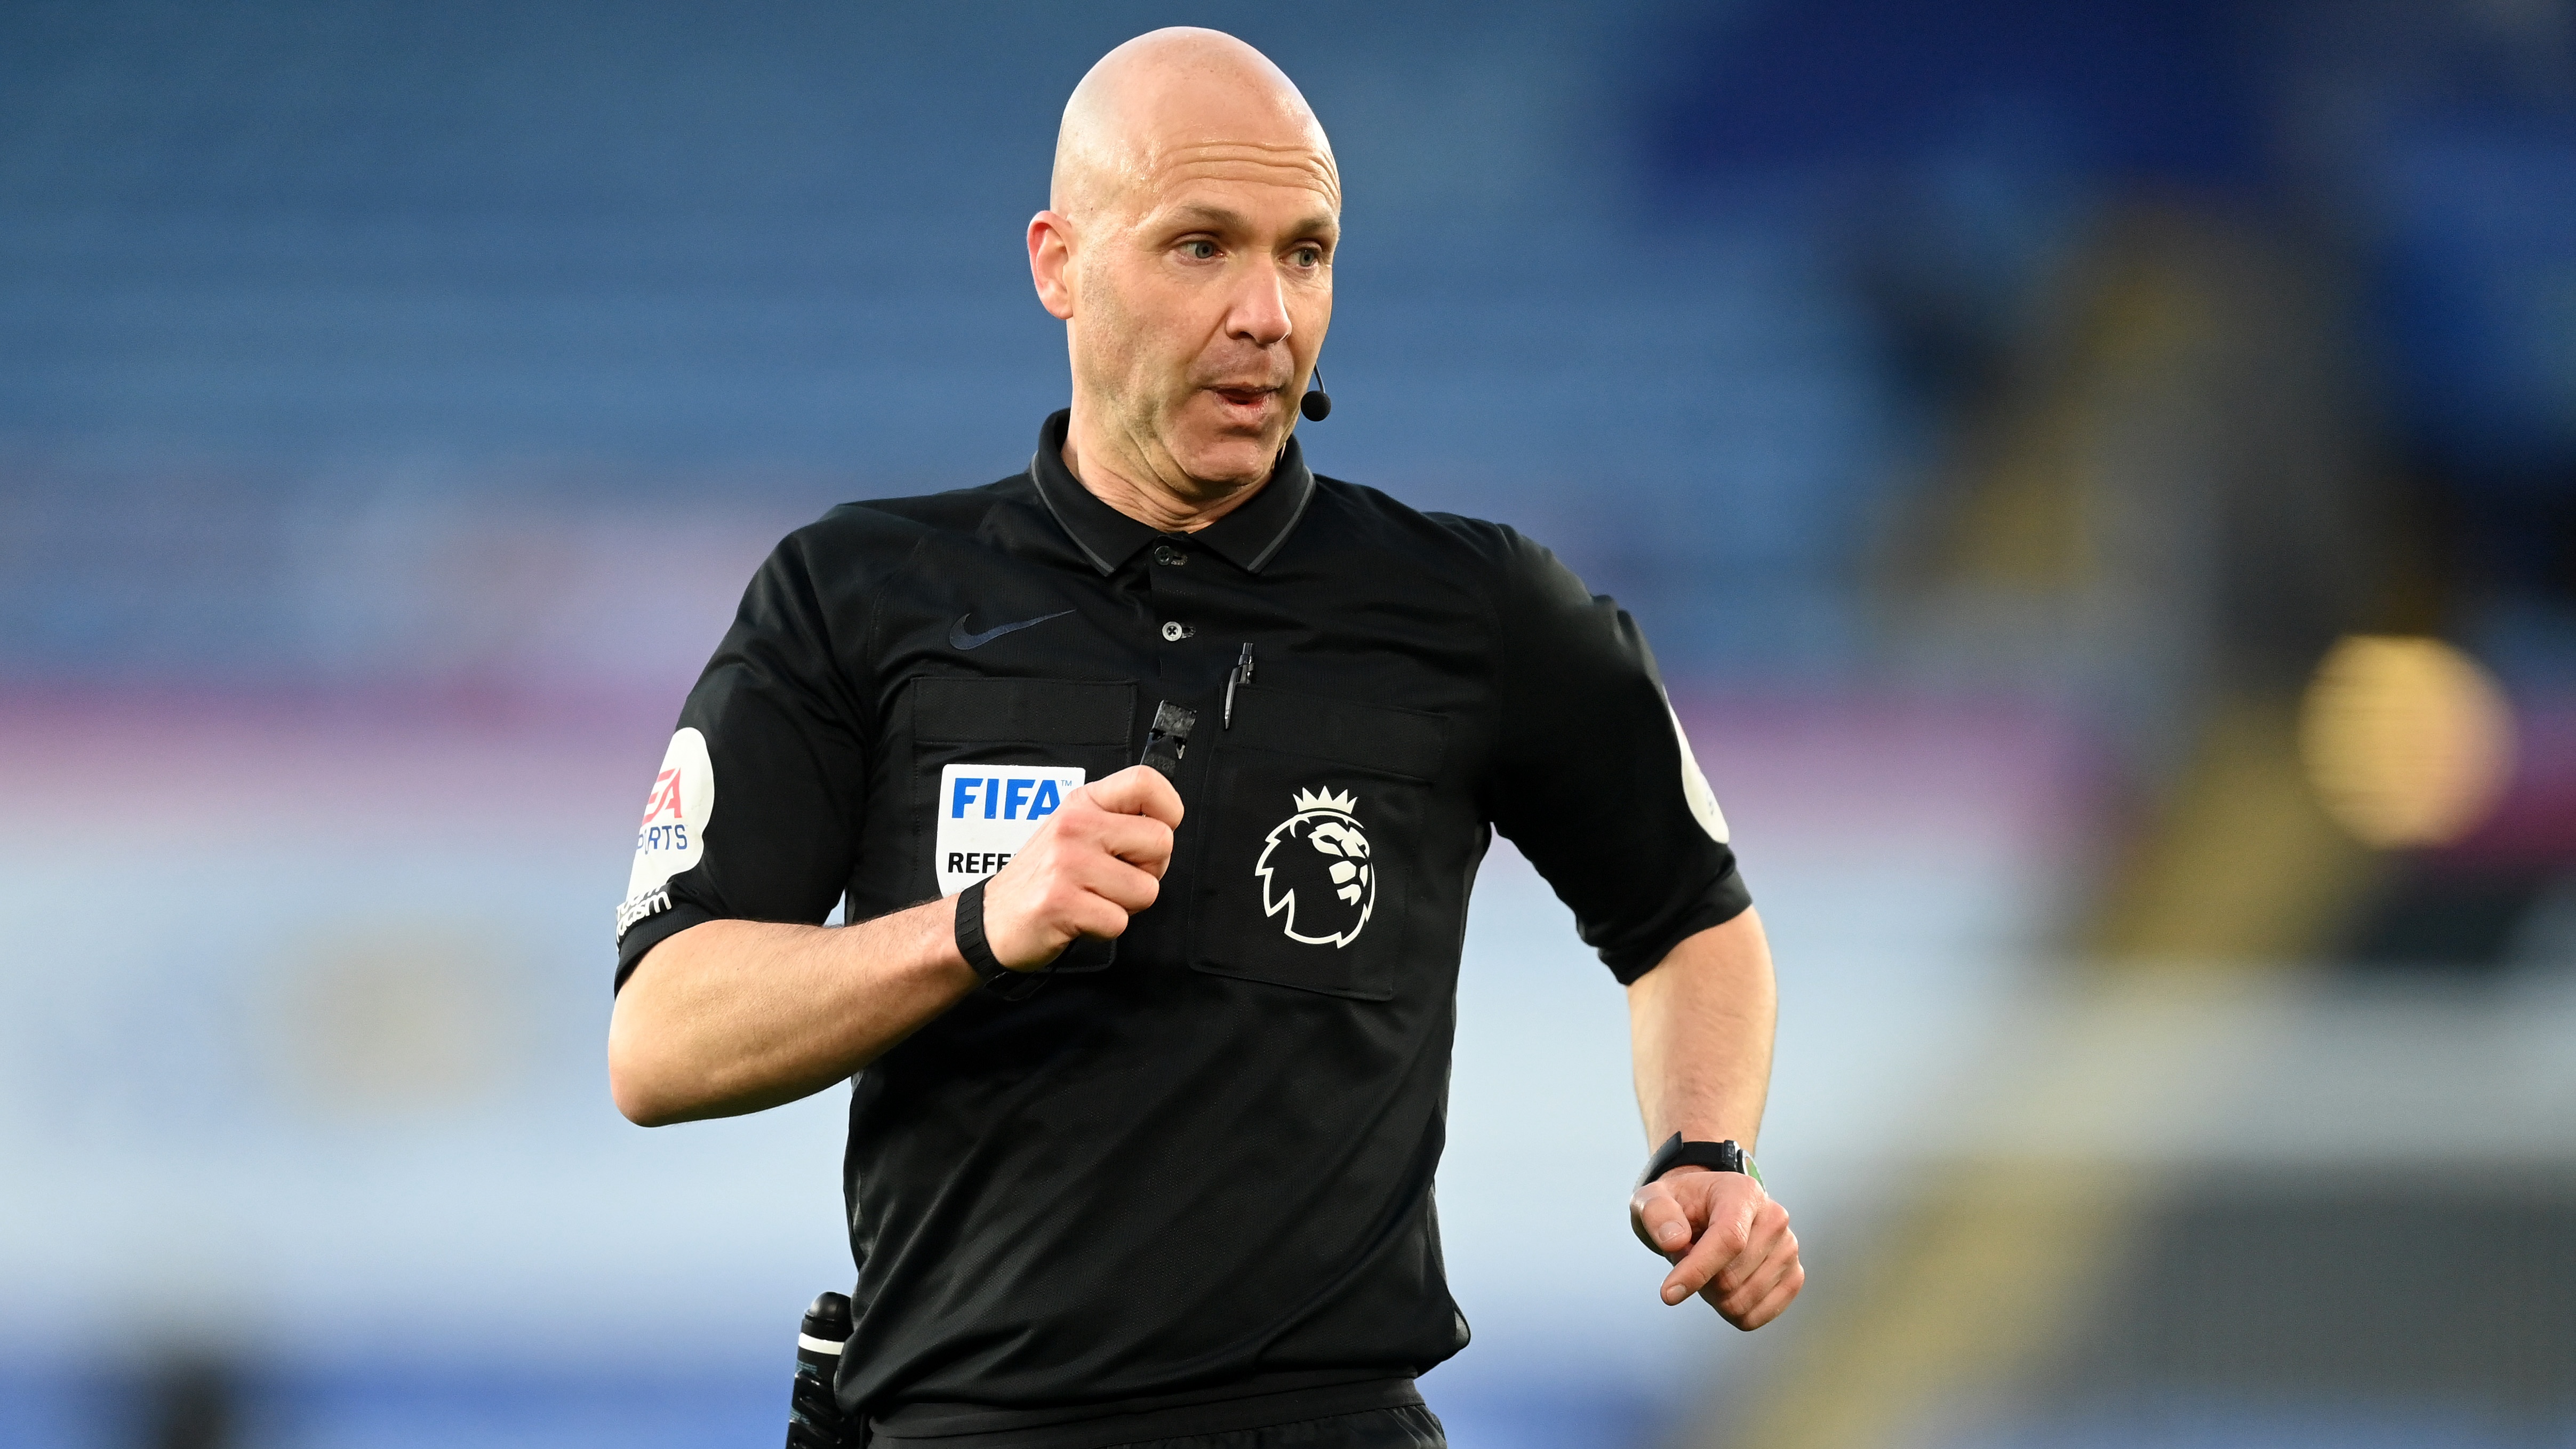  Match officials confirmed for Everton clash